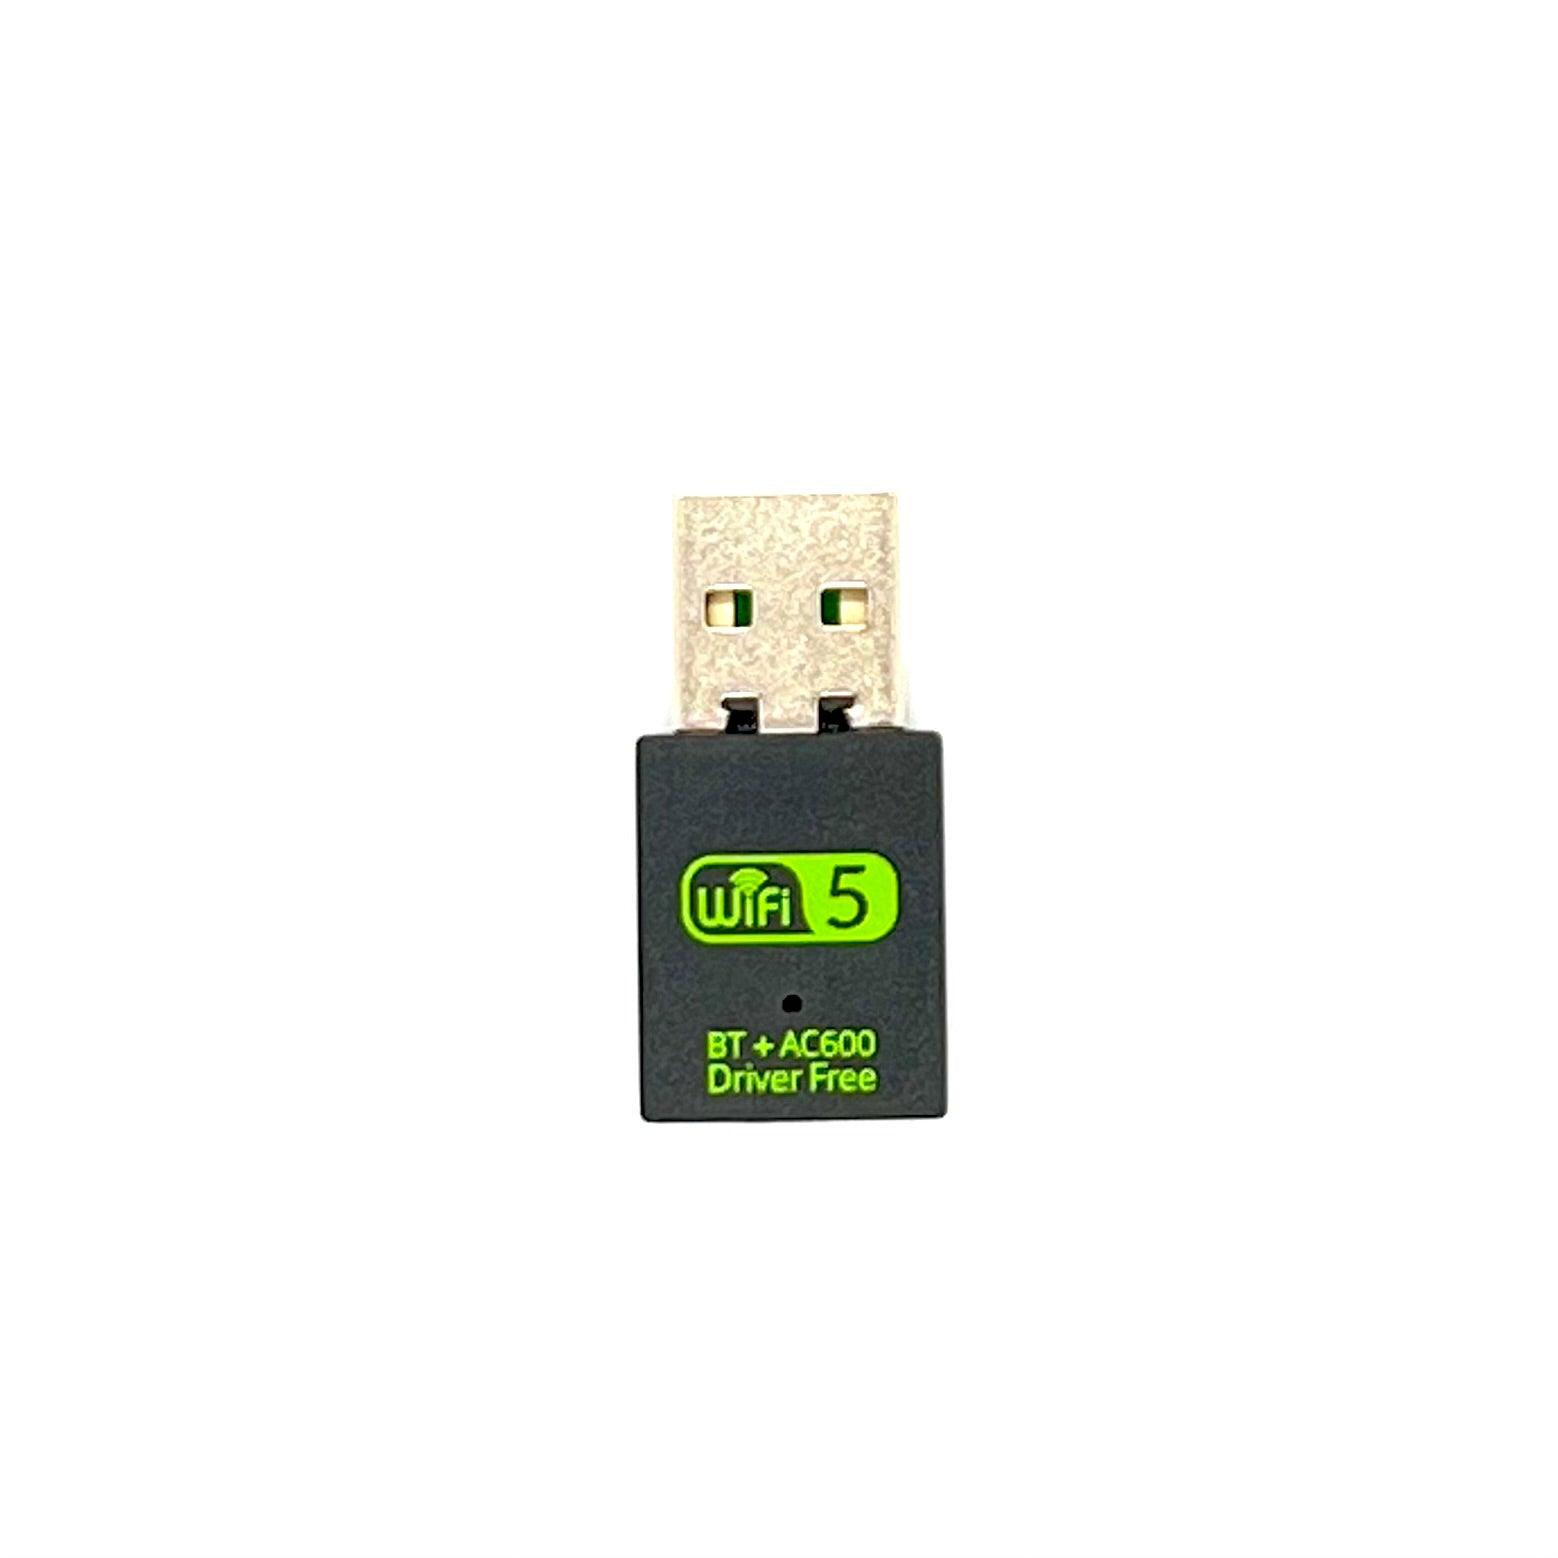 BYPOS Bluetooth-USB-Dongle for AS-7210